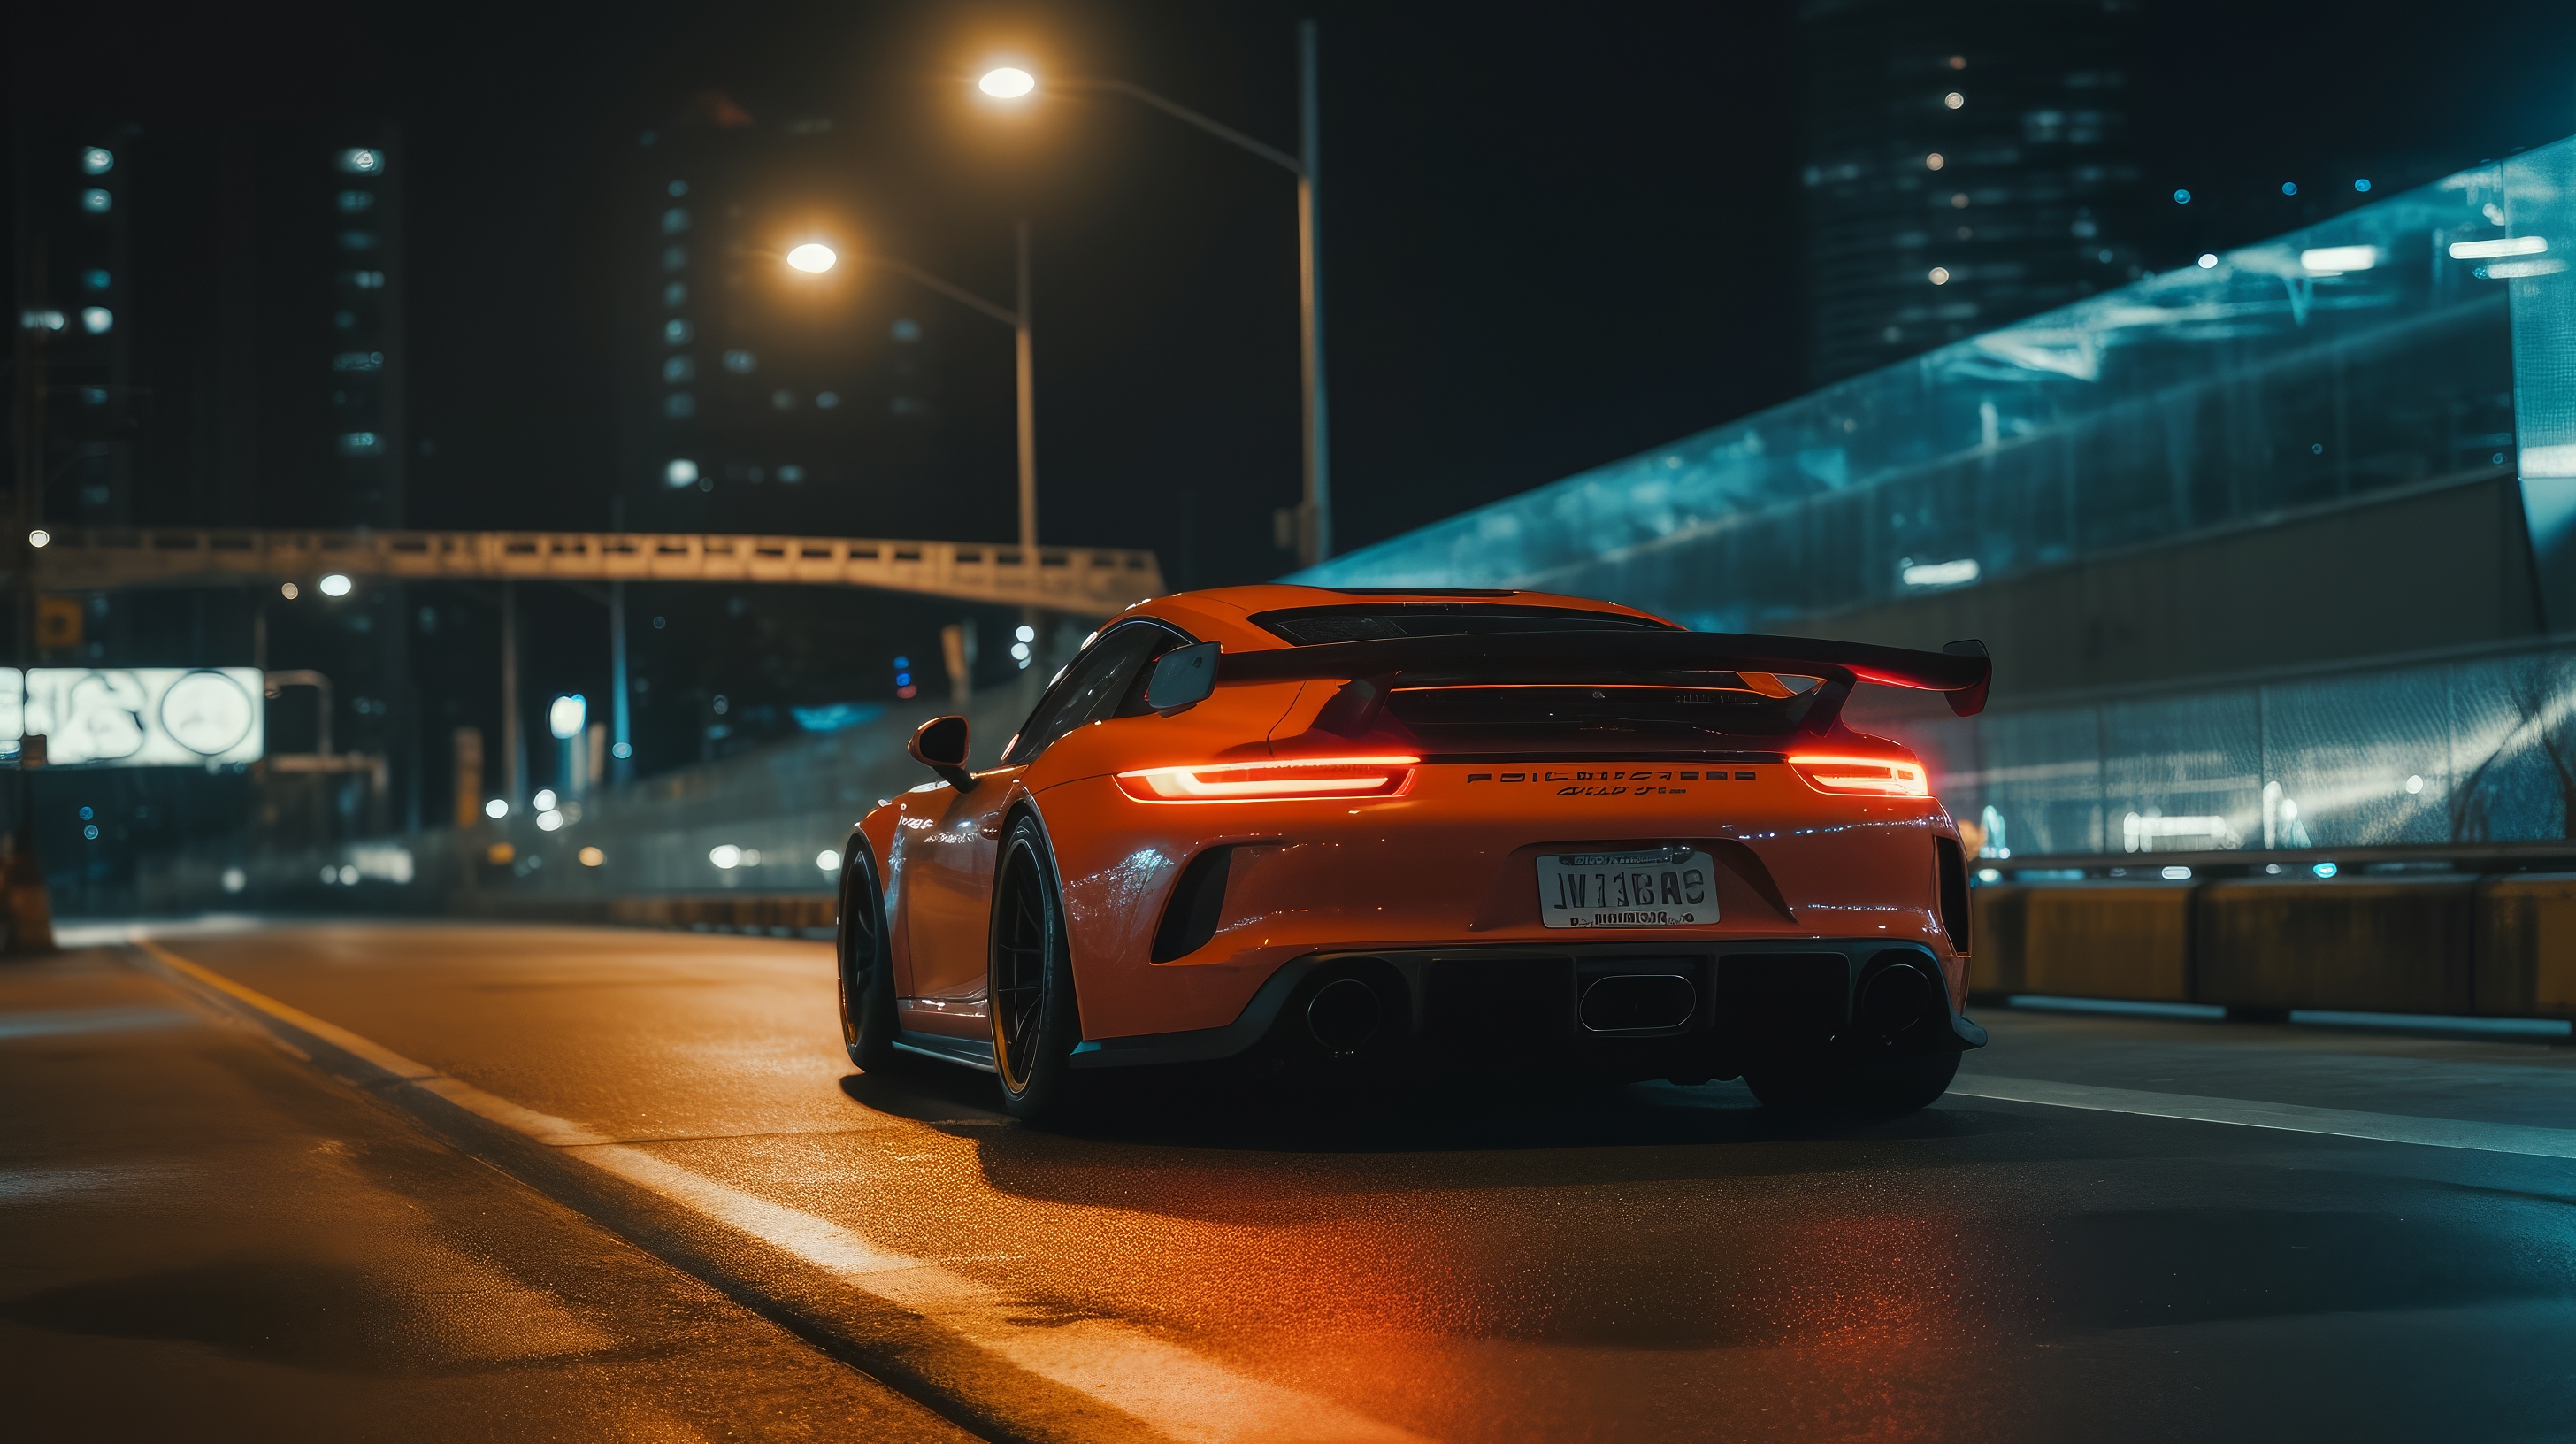 General 2912x1632 AI art street racing night muscle cars city orange taillights licence plates rear view street light